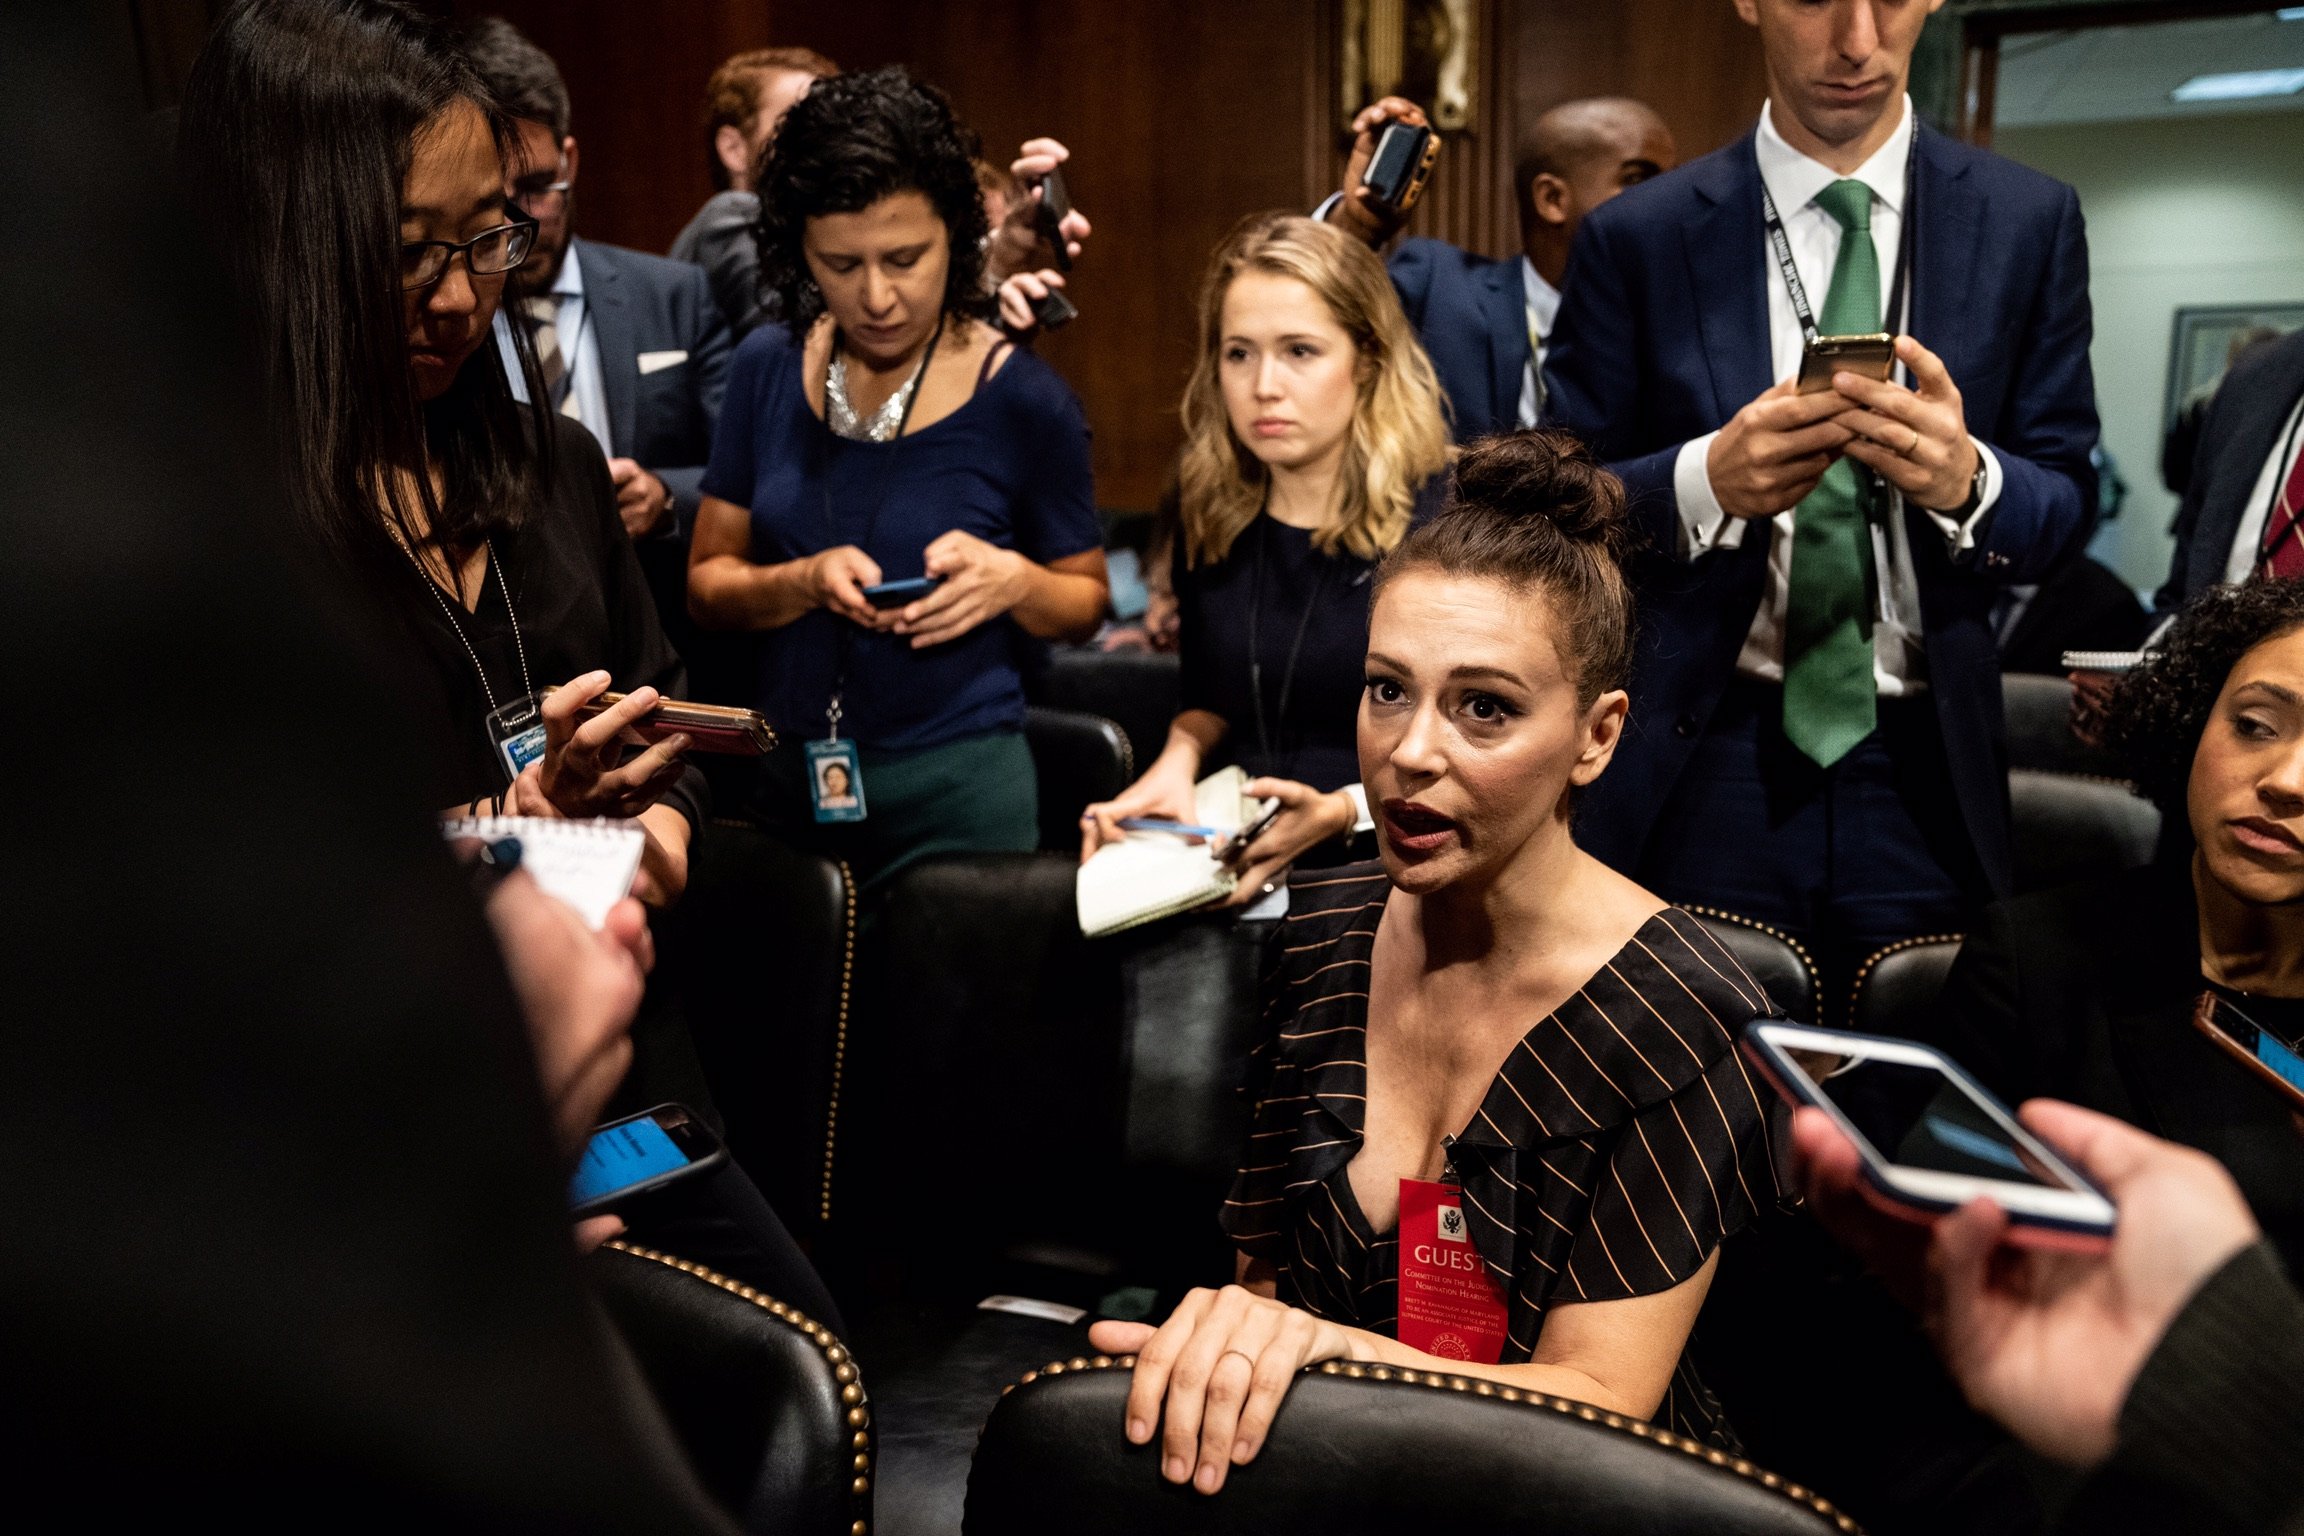 Actress Alyssa Milano is seen ahead of a Senate Judiciary Committee hearing of Dr. Christine Blasey Ford at the Capitol Hill in Washington, U.S., September 27, 2018. Erin Schaff/Pool via REUTERS 